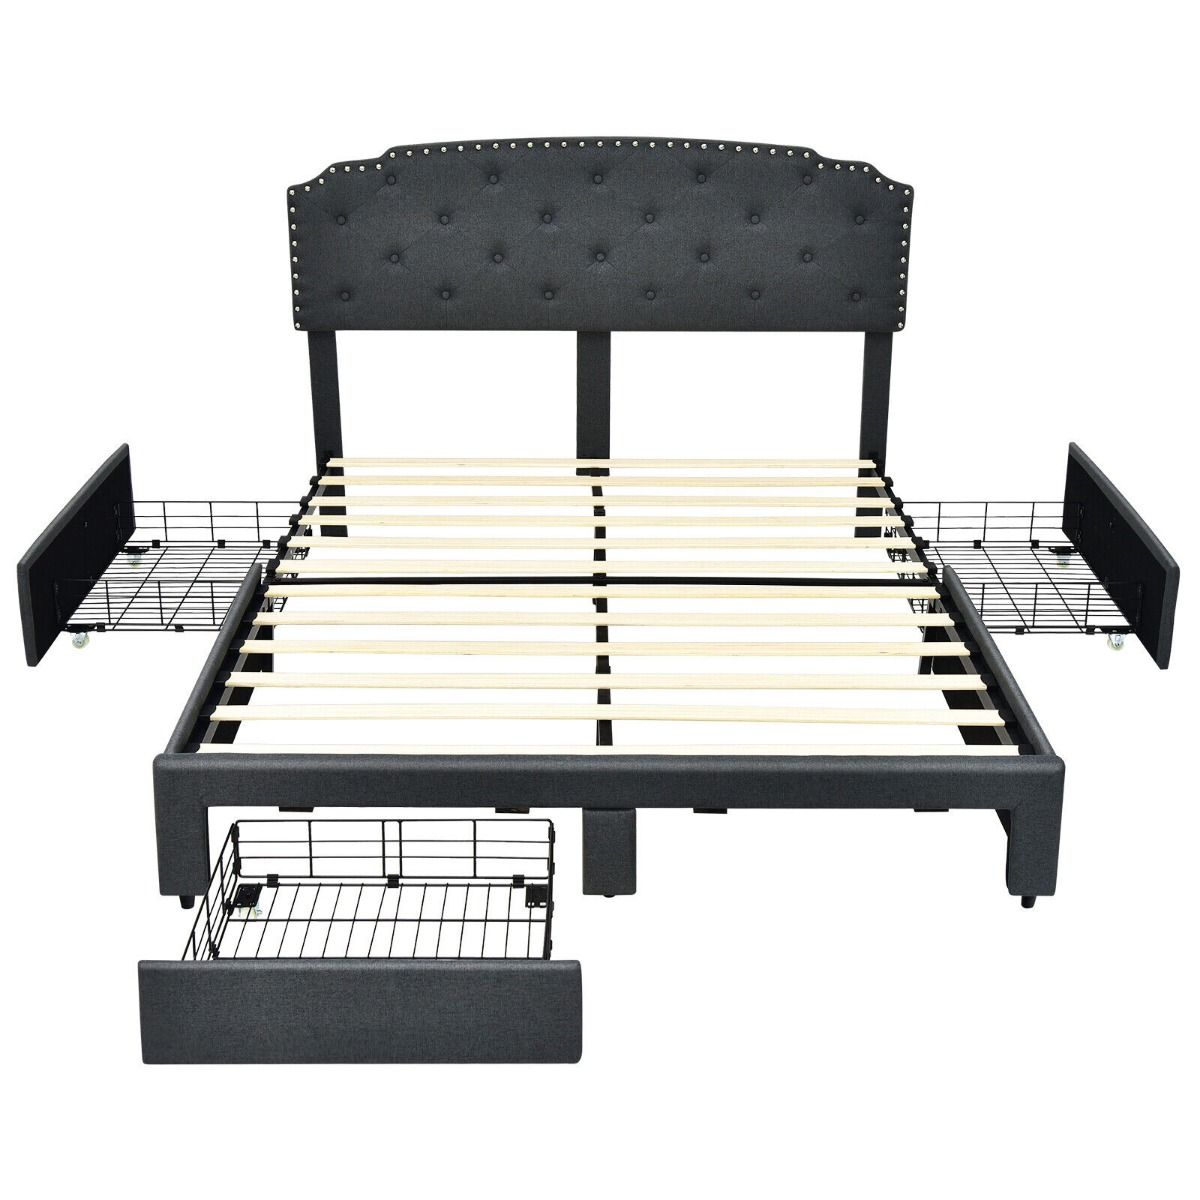 Upholstered Double Bed Frame with 4 Storage Drawers and Adjustable Headboard